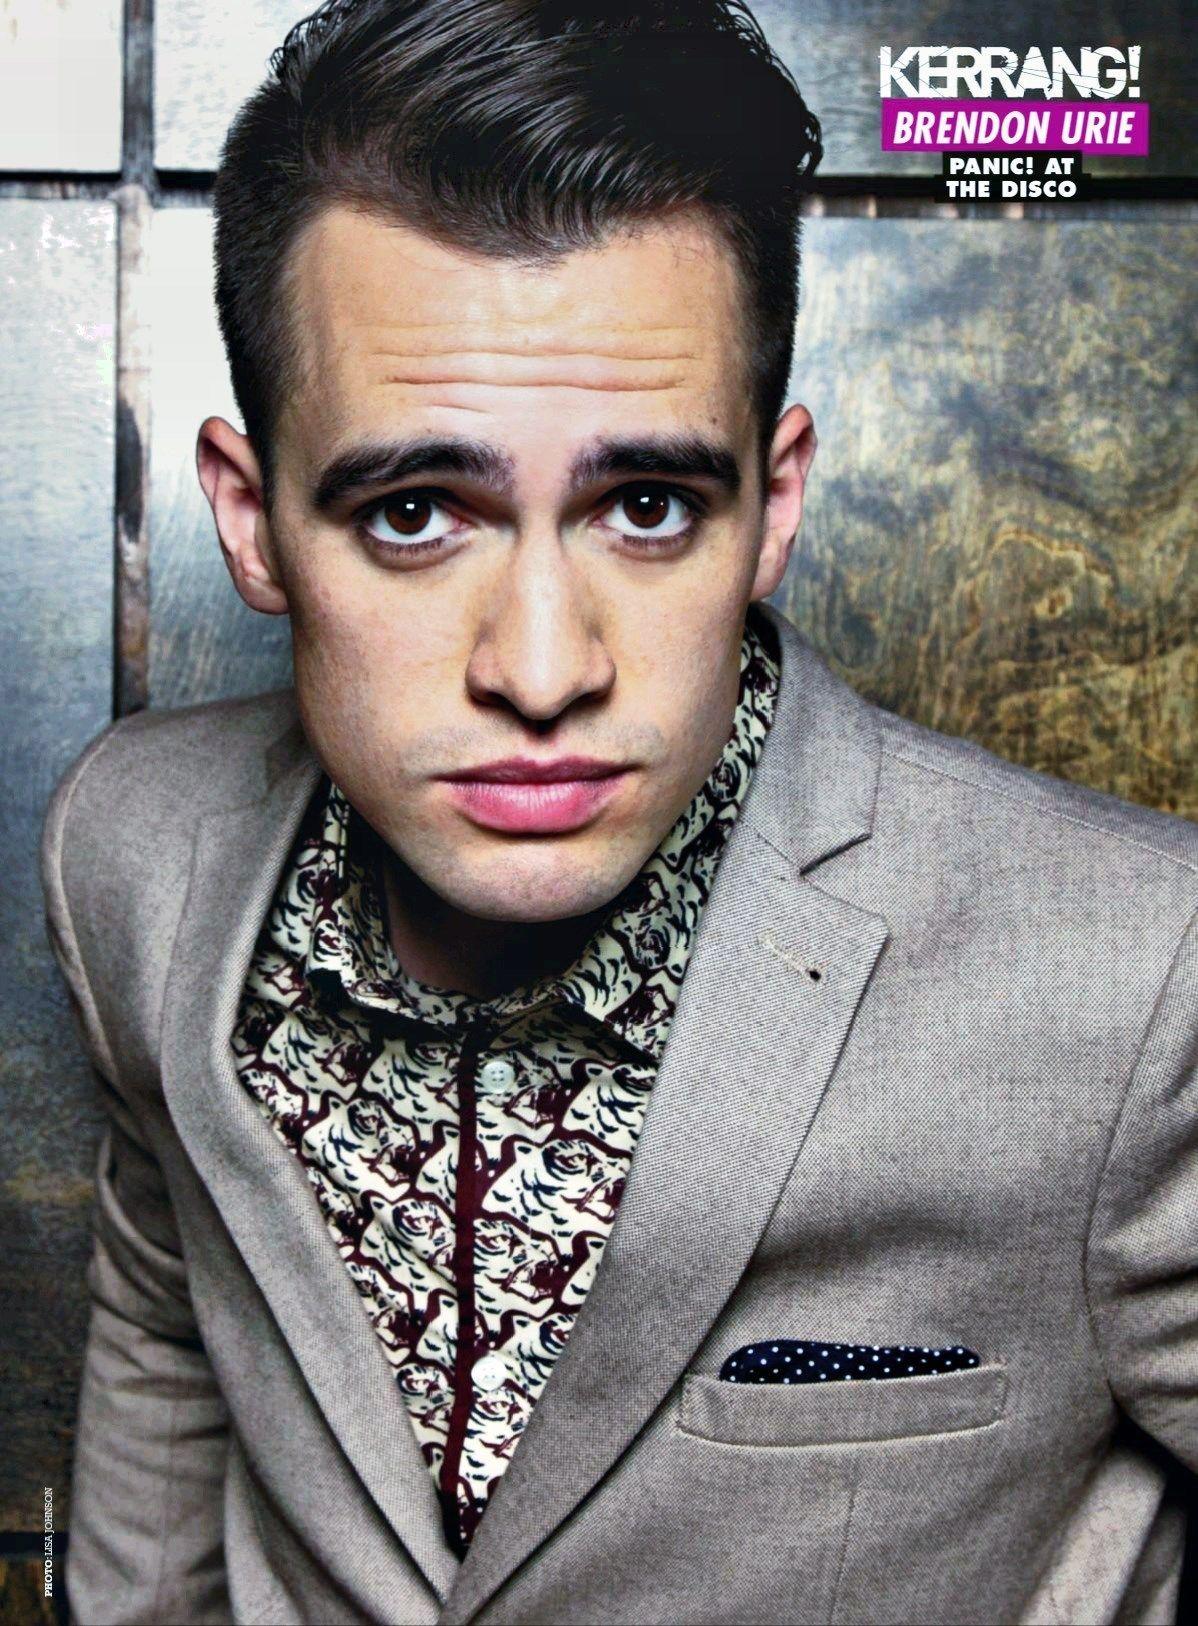 Brendon Urie. Known people people news and biographies